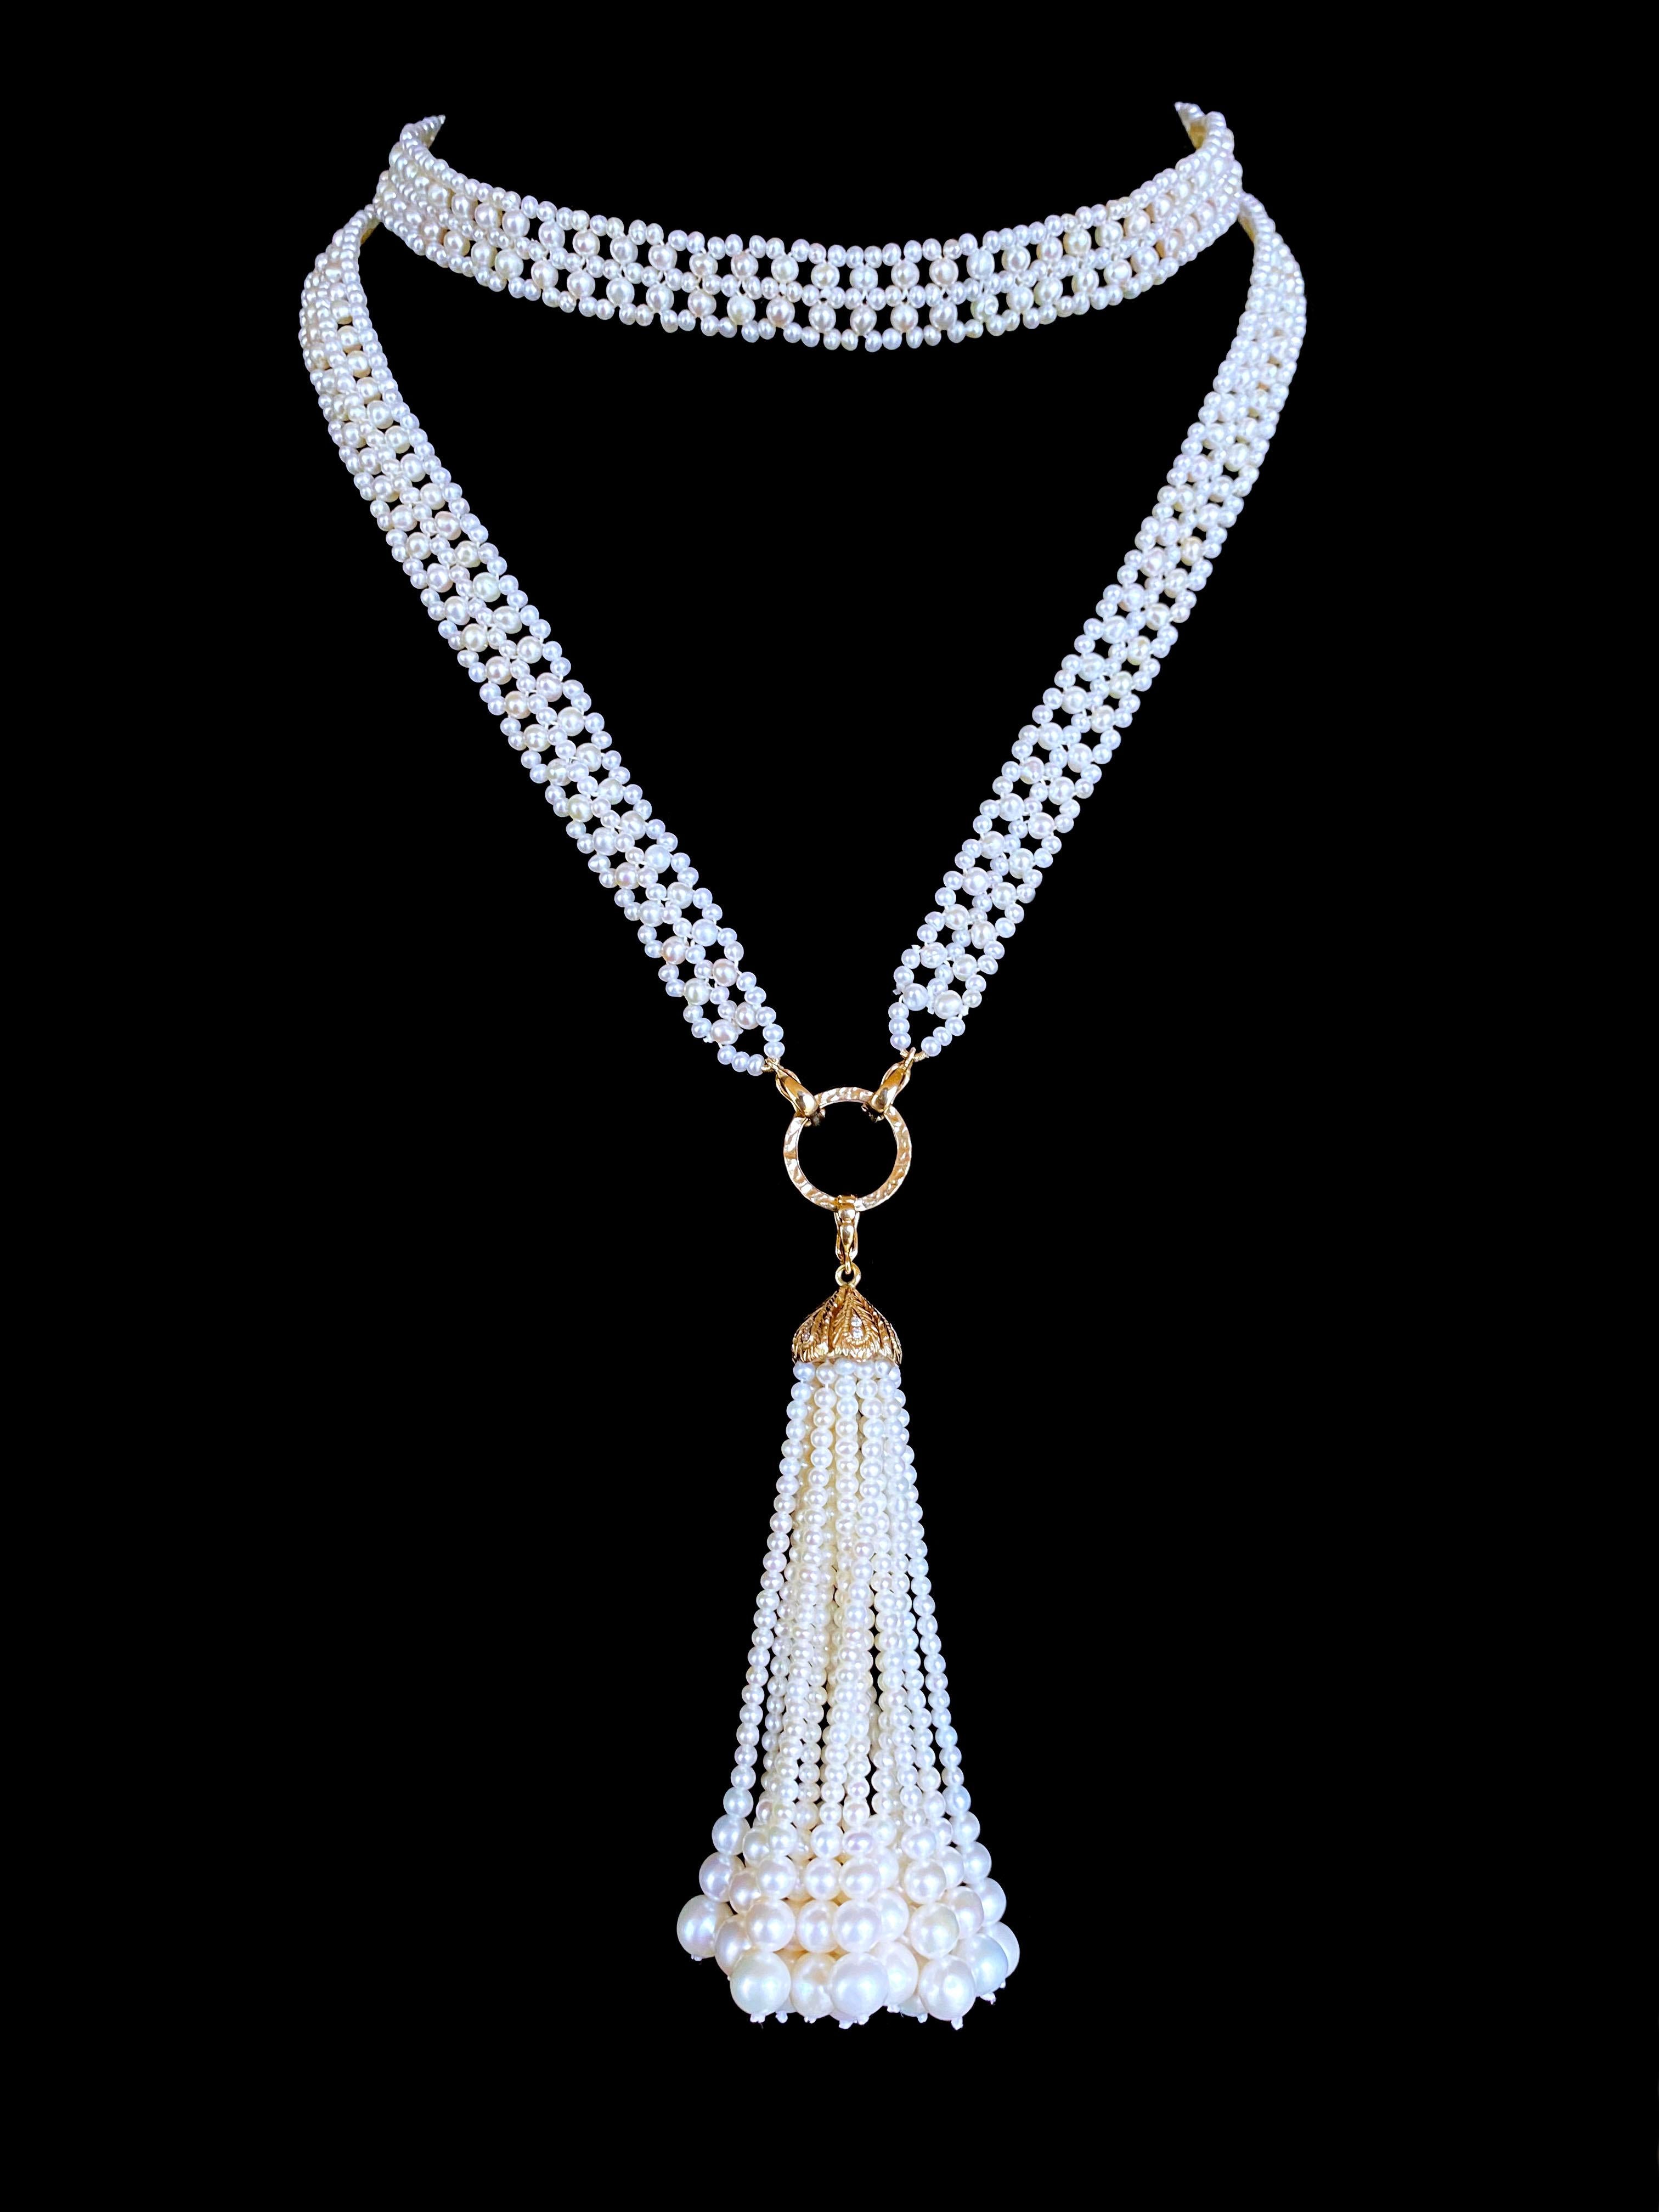 Classic and gorgeous closed Sautoir by Marina J. This Sautoir is inspired by old world jewelry and made of all Seed Pearls intricately woven together into a fine Lace like design. Measuring 35 inches long sans Tassel, each end of this Sautoir meet